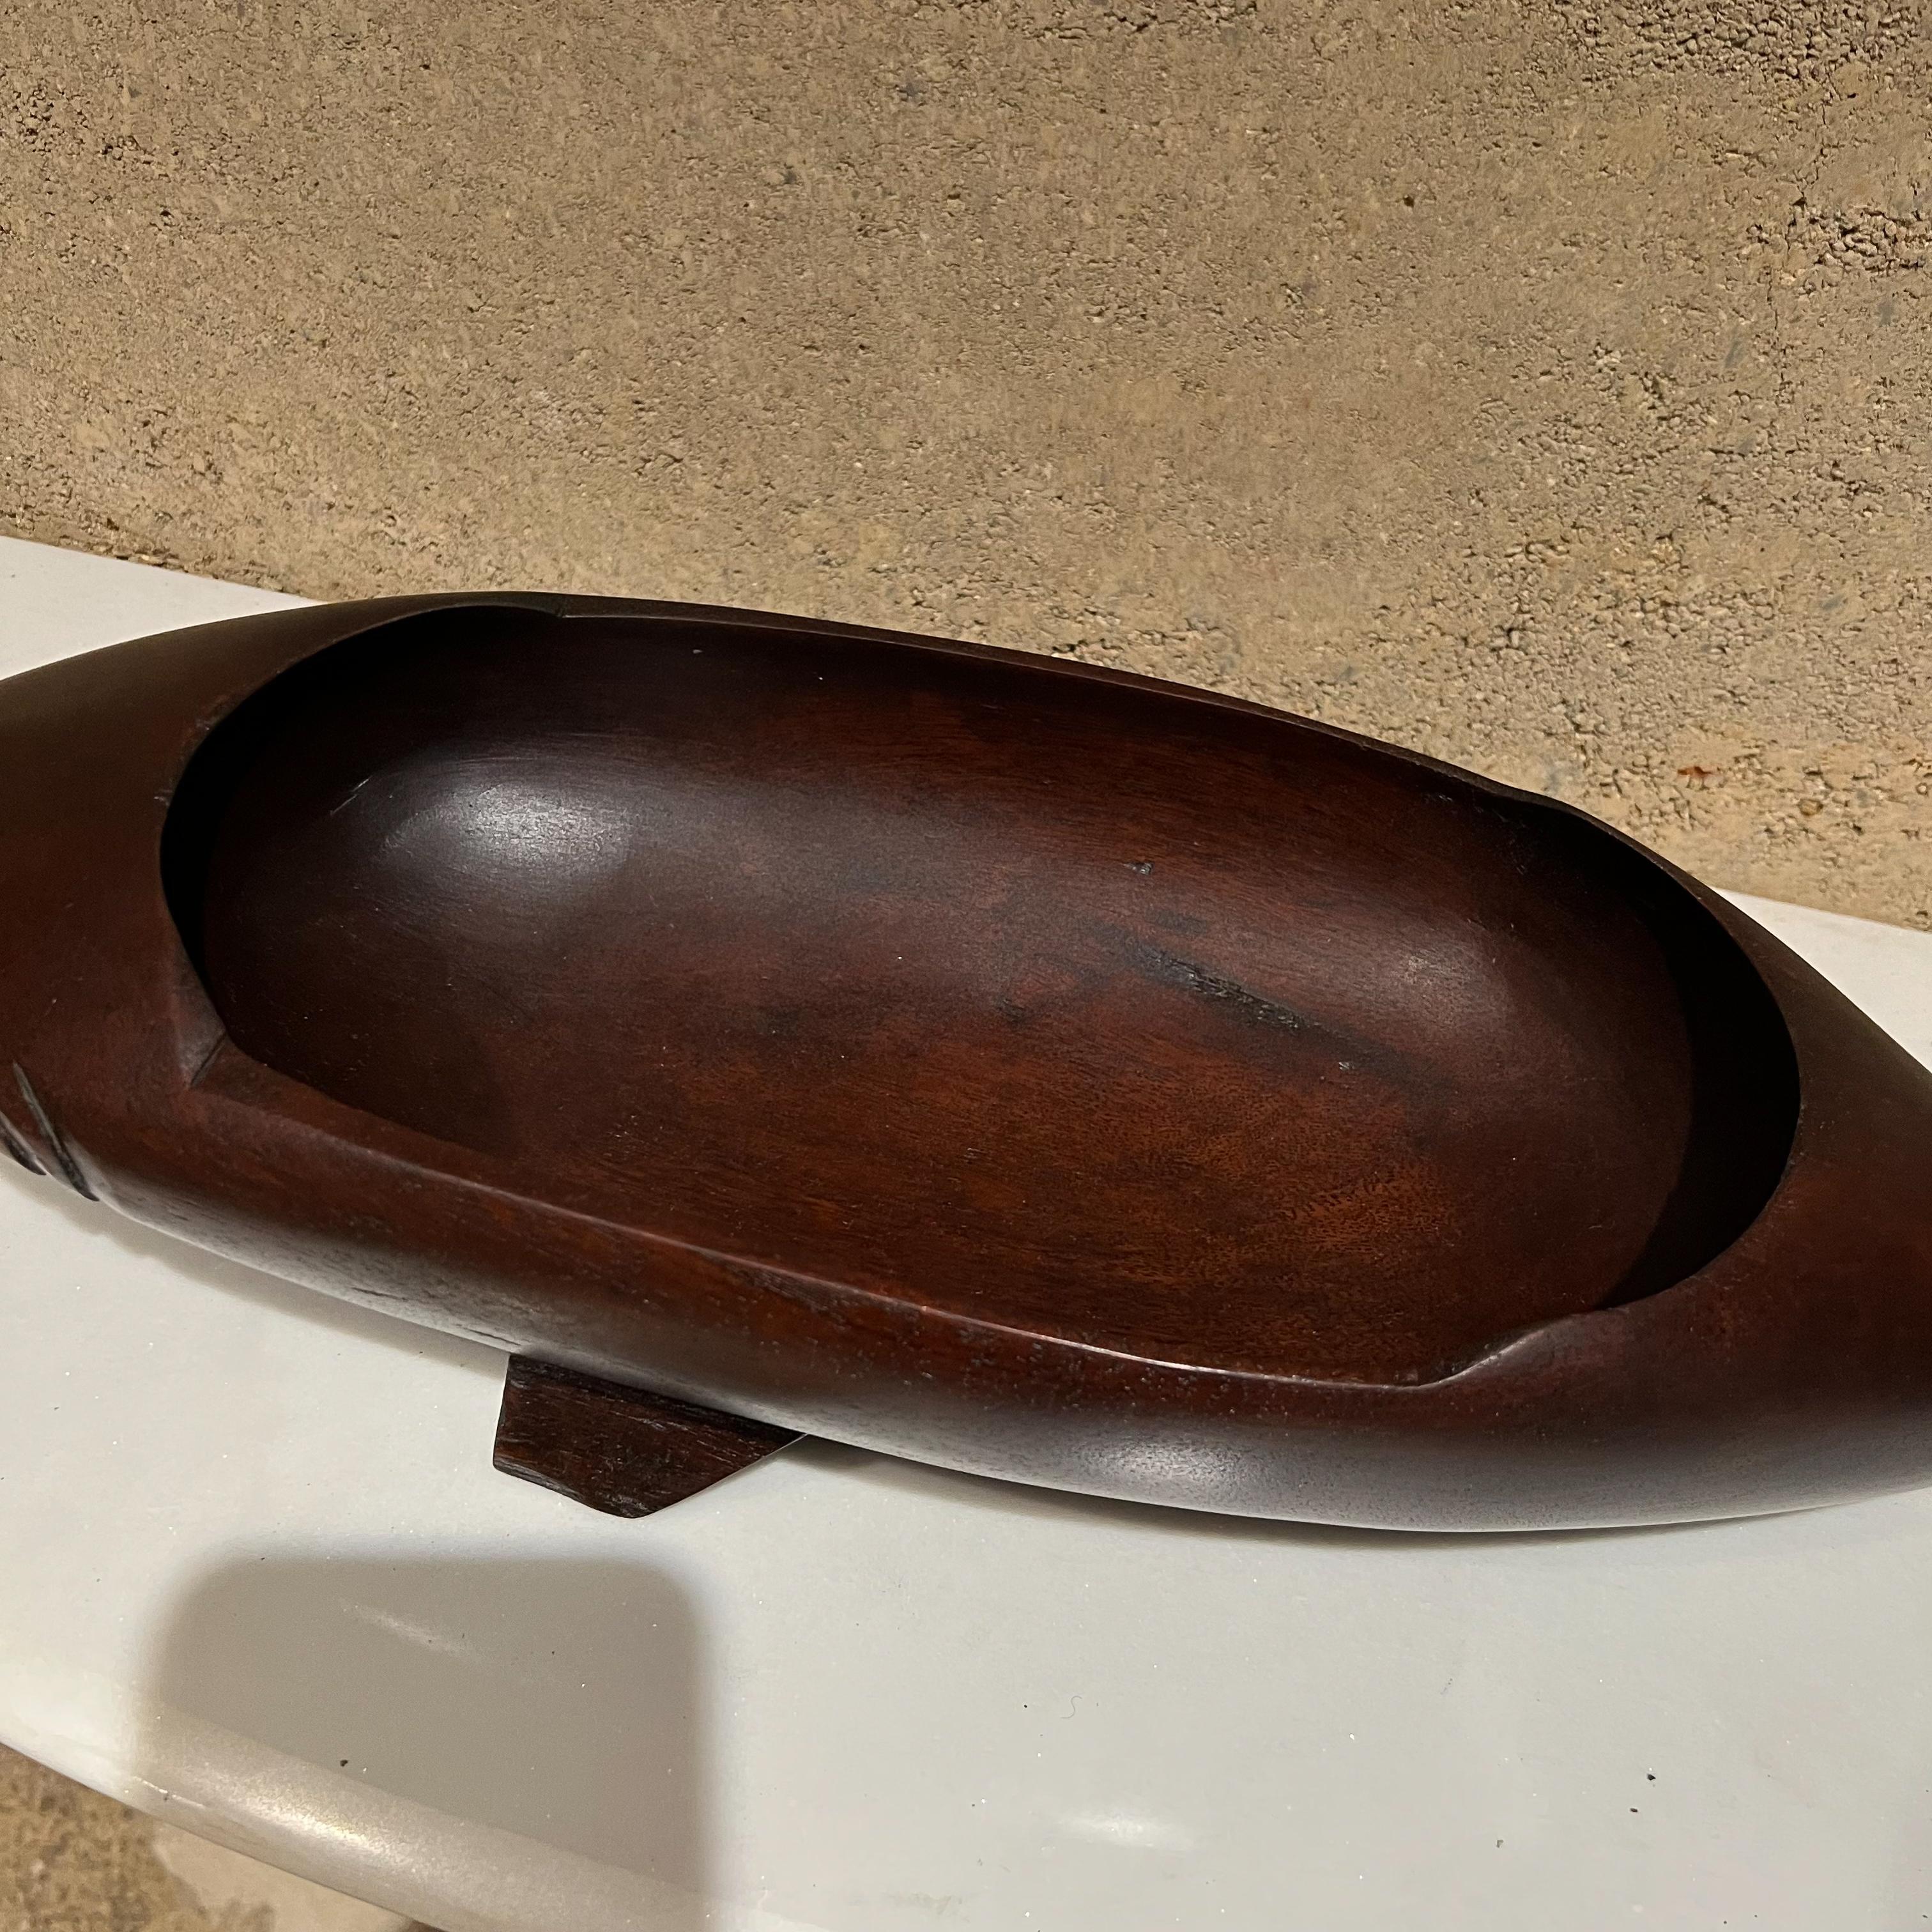 Shark bowl
Modernist sculpted wood shark bowl catchall dish
Measures: 3.75 tall x 7.5 w x 24 l inside bowl 6.75 x 12.75
Preowned unrestored vintage condition
See images provided.
  